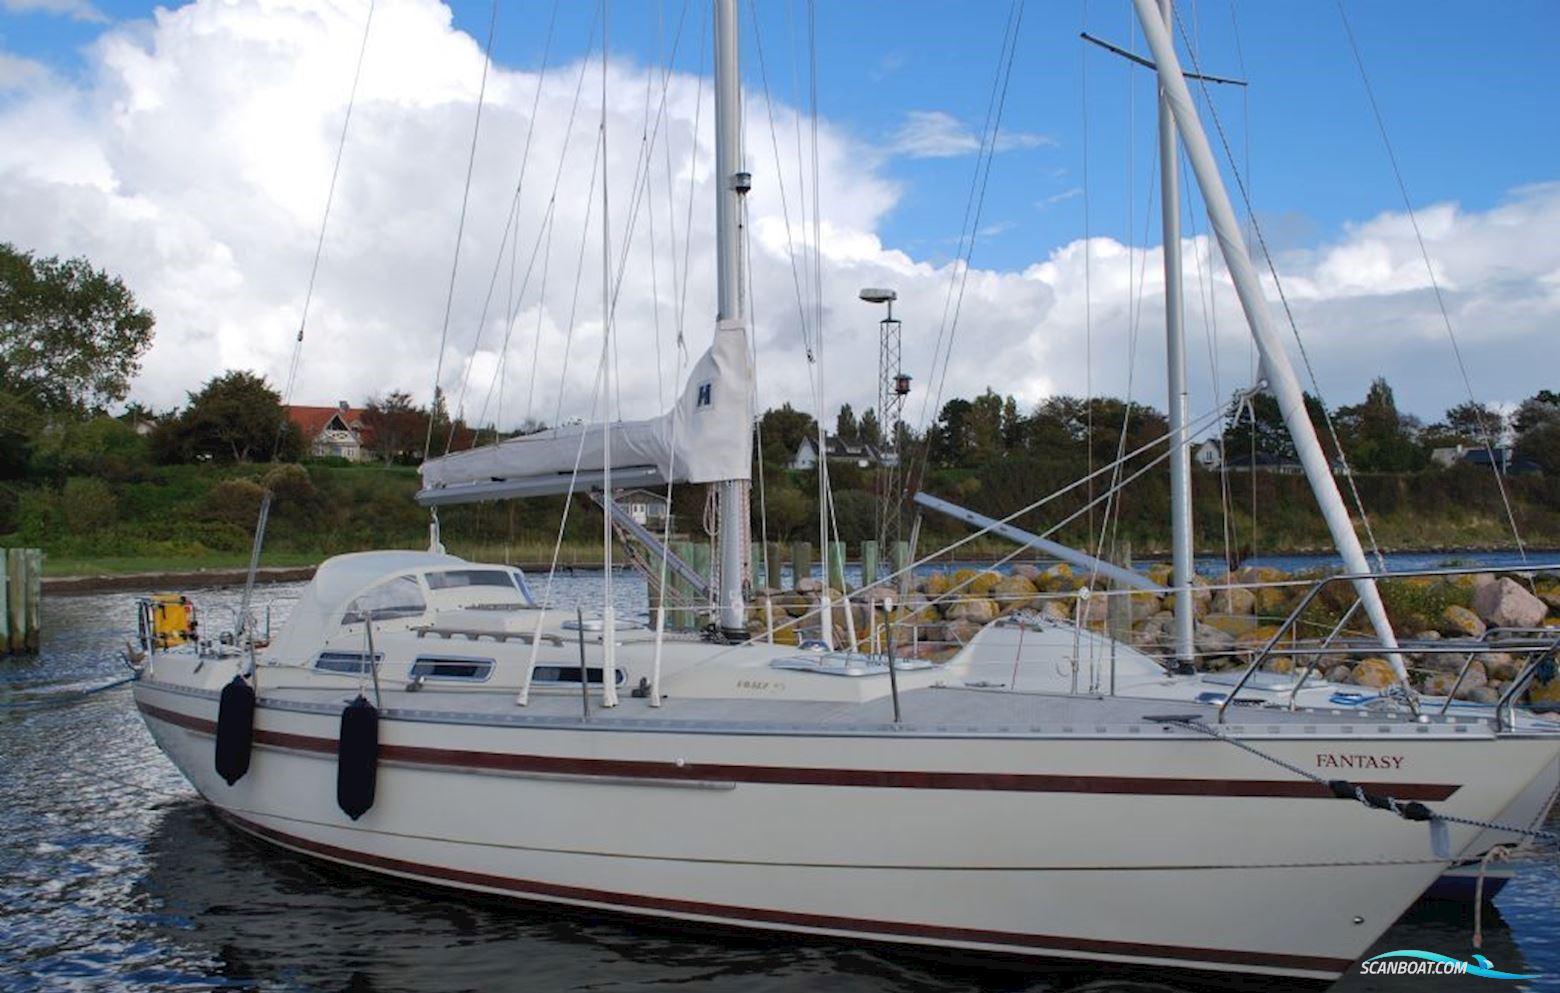 Faurby 36 Sailing boat 1986, with Volvo Penta D1-30 engine, Denmark